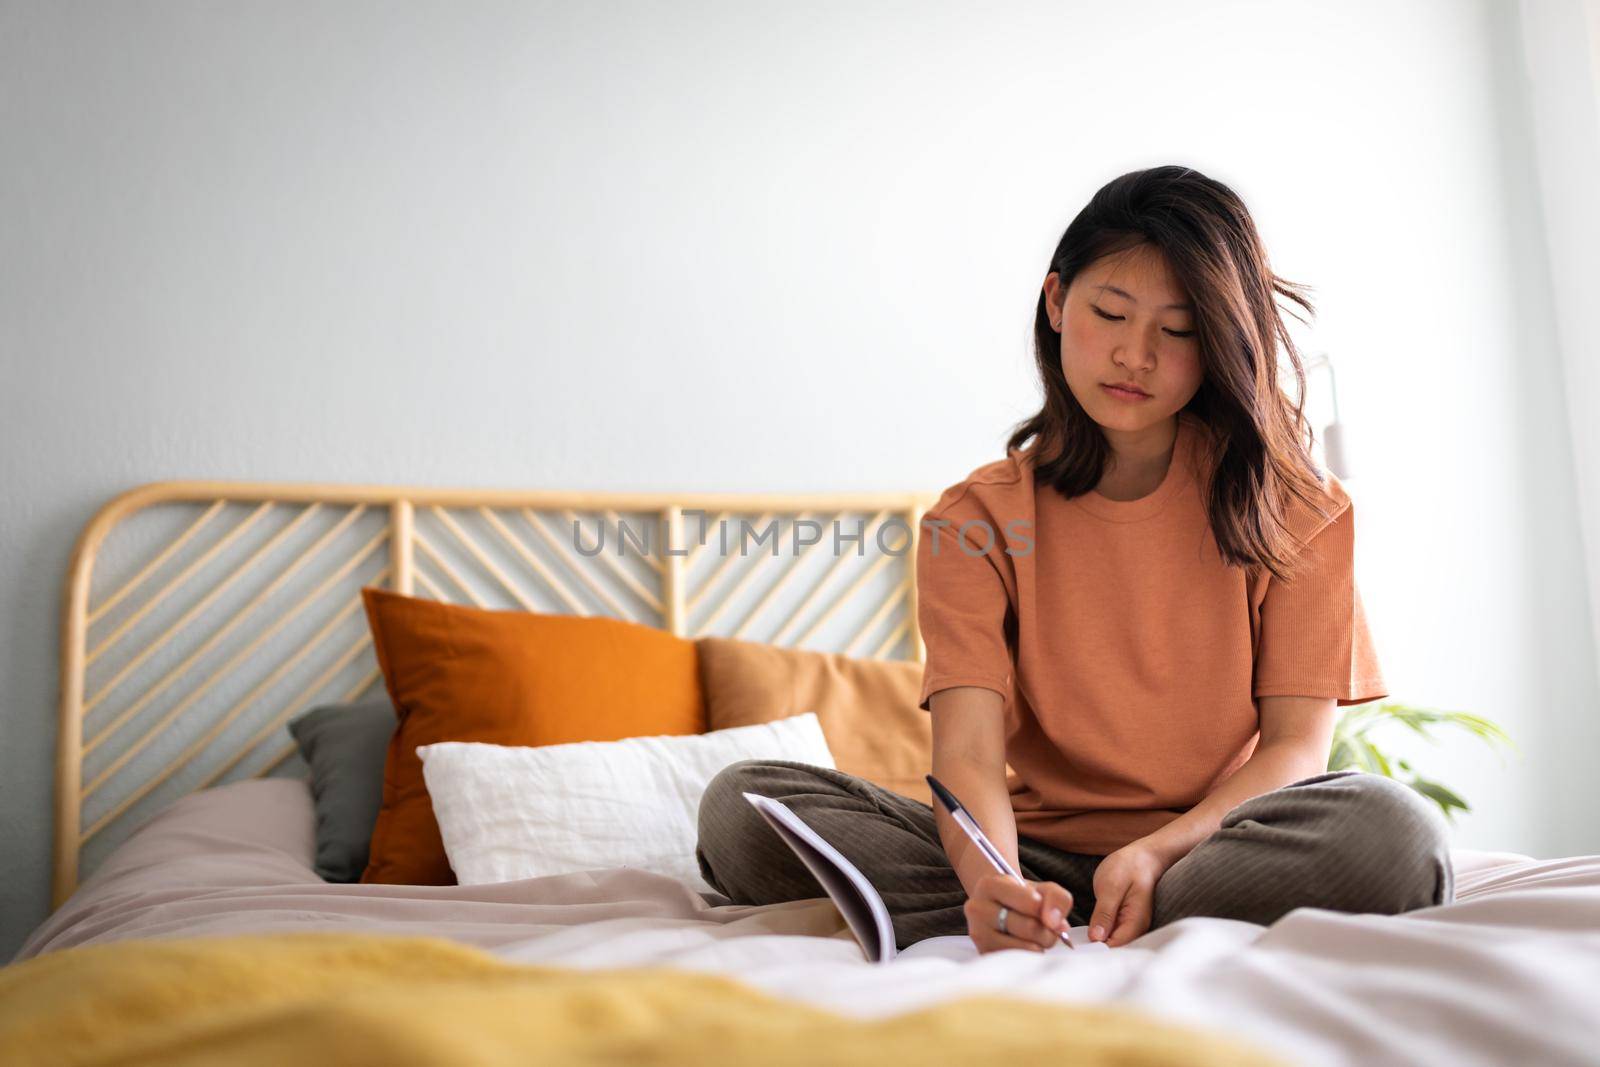 Pensive young Asian woman sitting on bed with serious expression writing on journal in cozy bedroom. Copy space. Lifestyle concept.